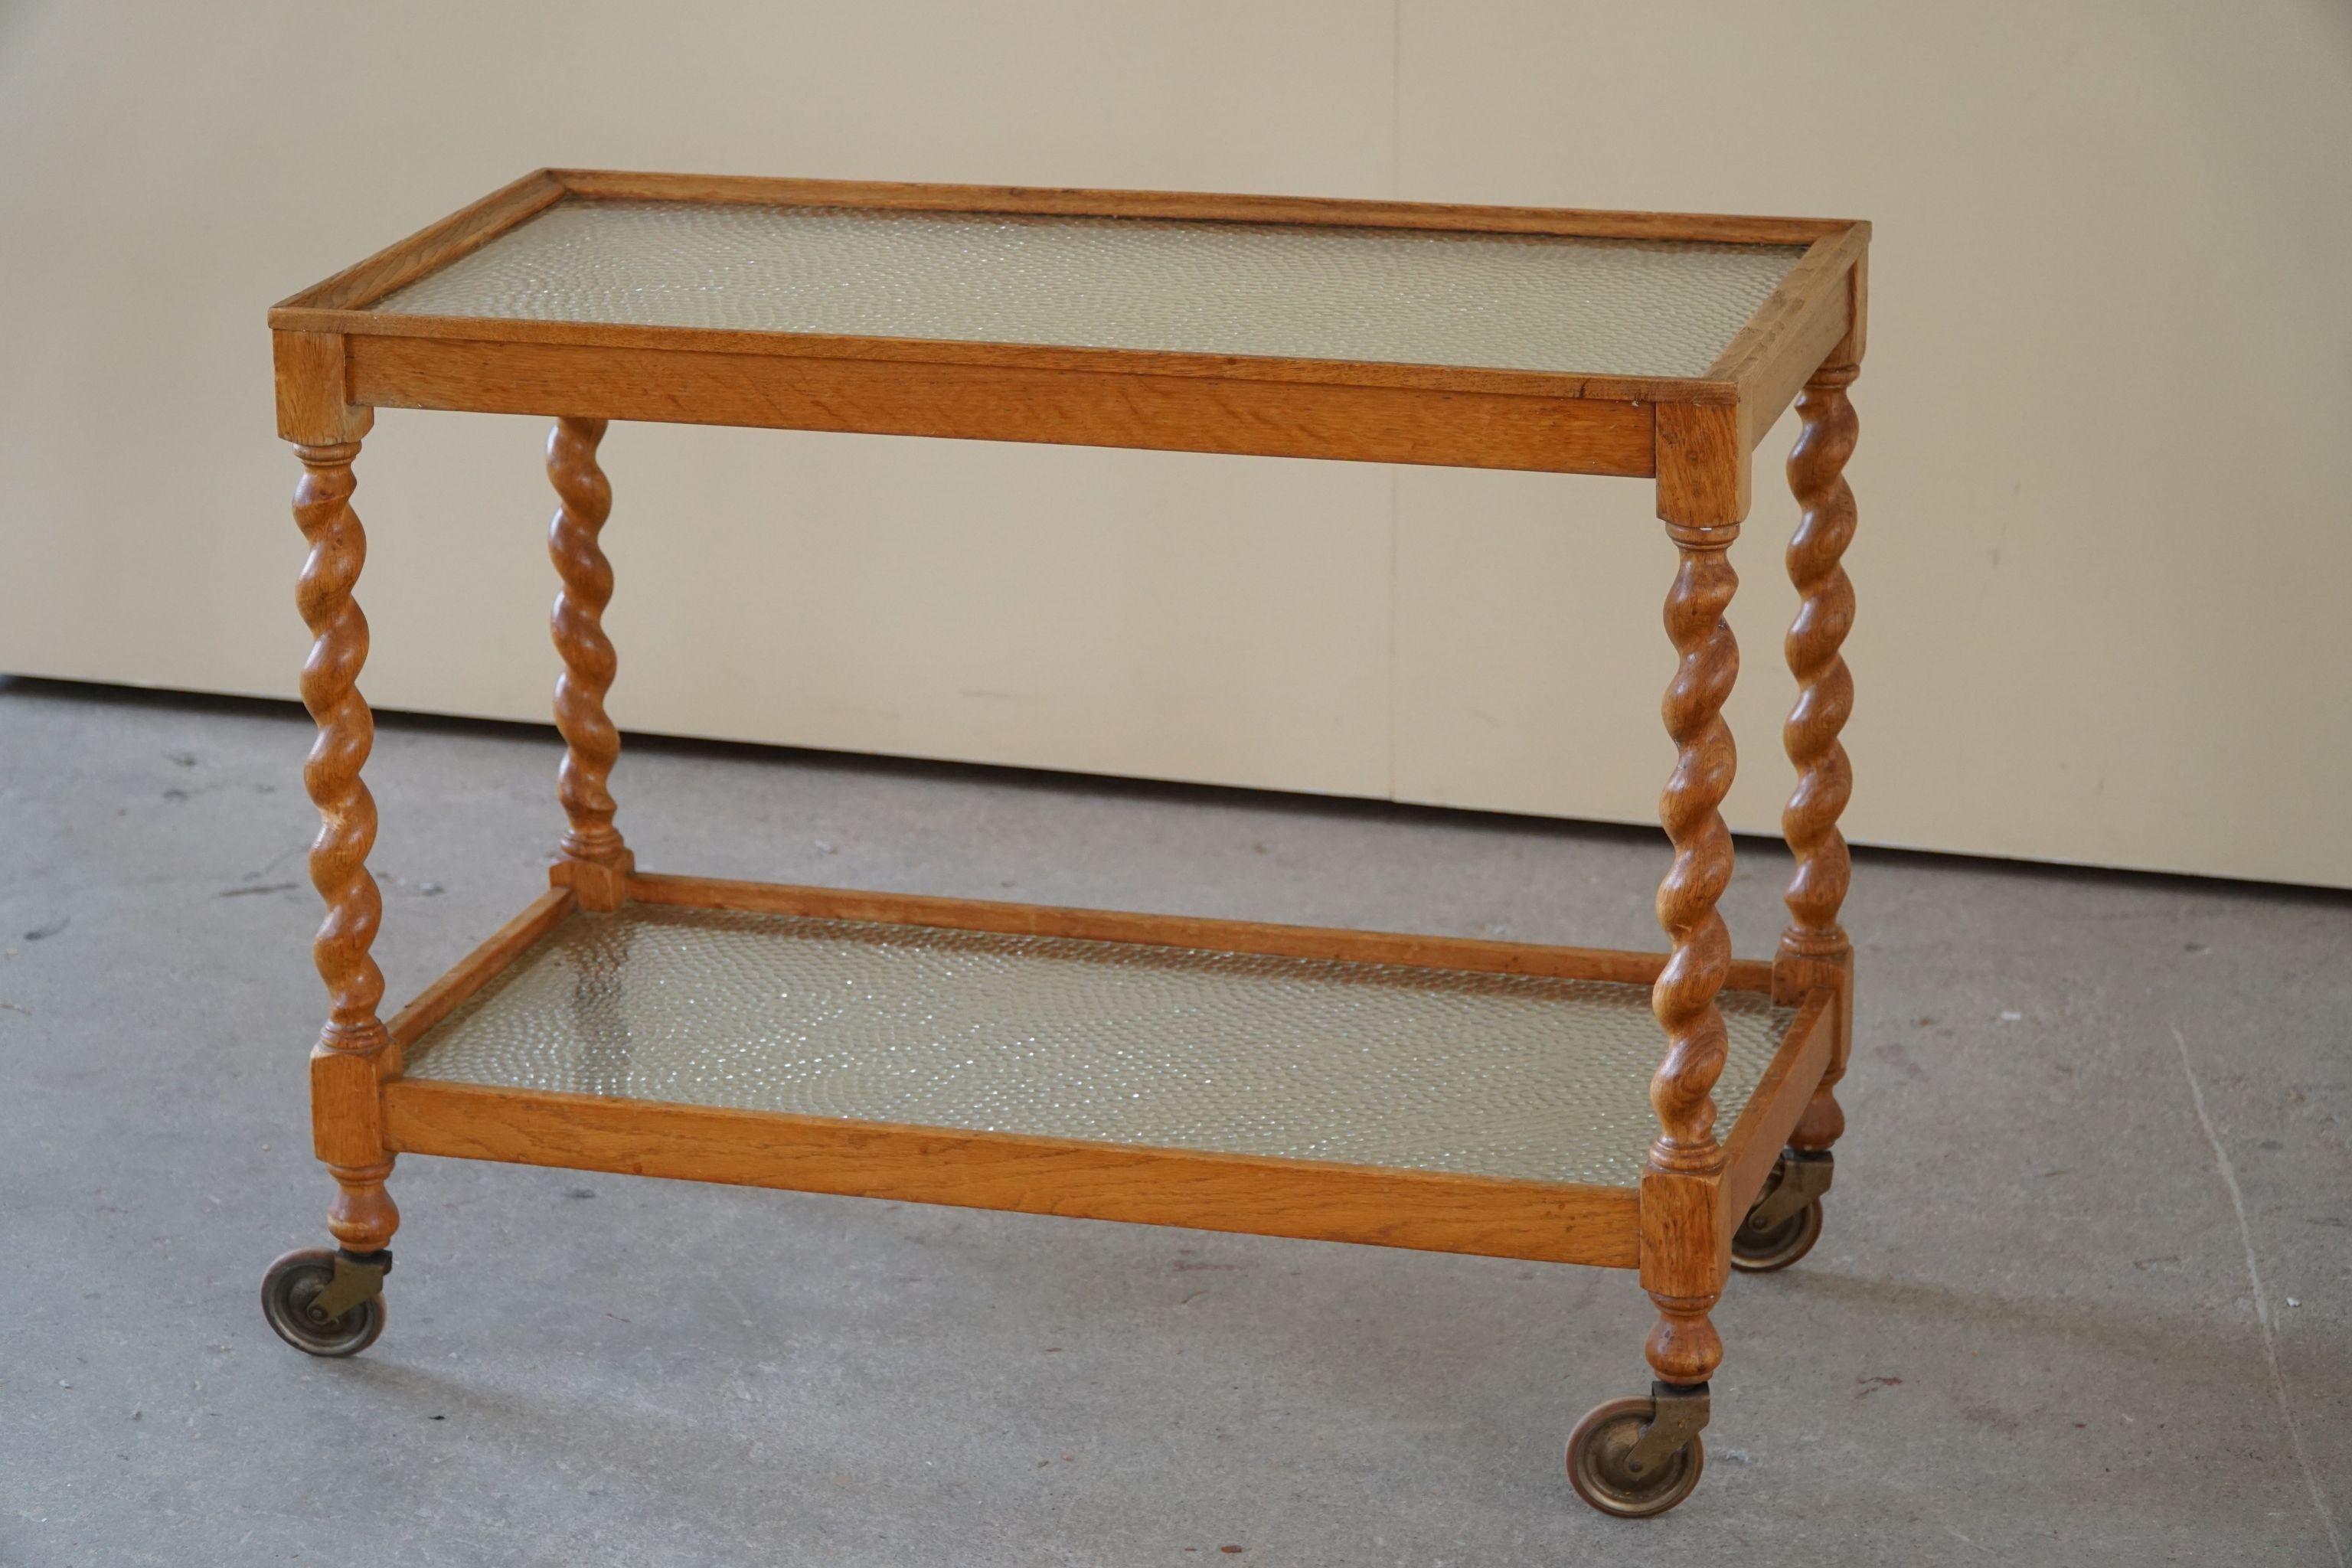 Serving Table in Oak by a Danish Cabinetmaker, Twisted Legs, Early 20th Century For Sale 1